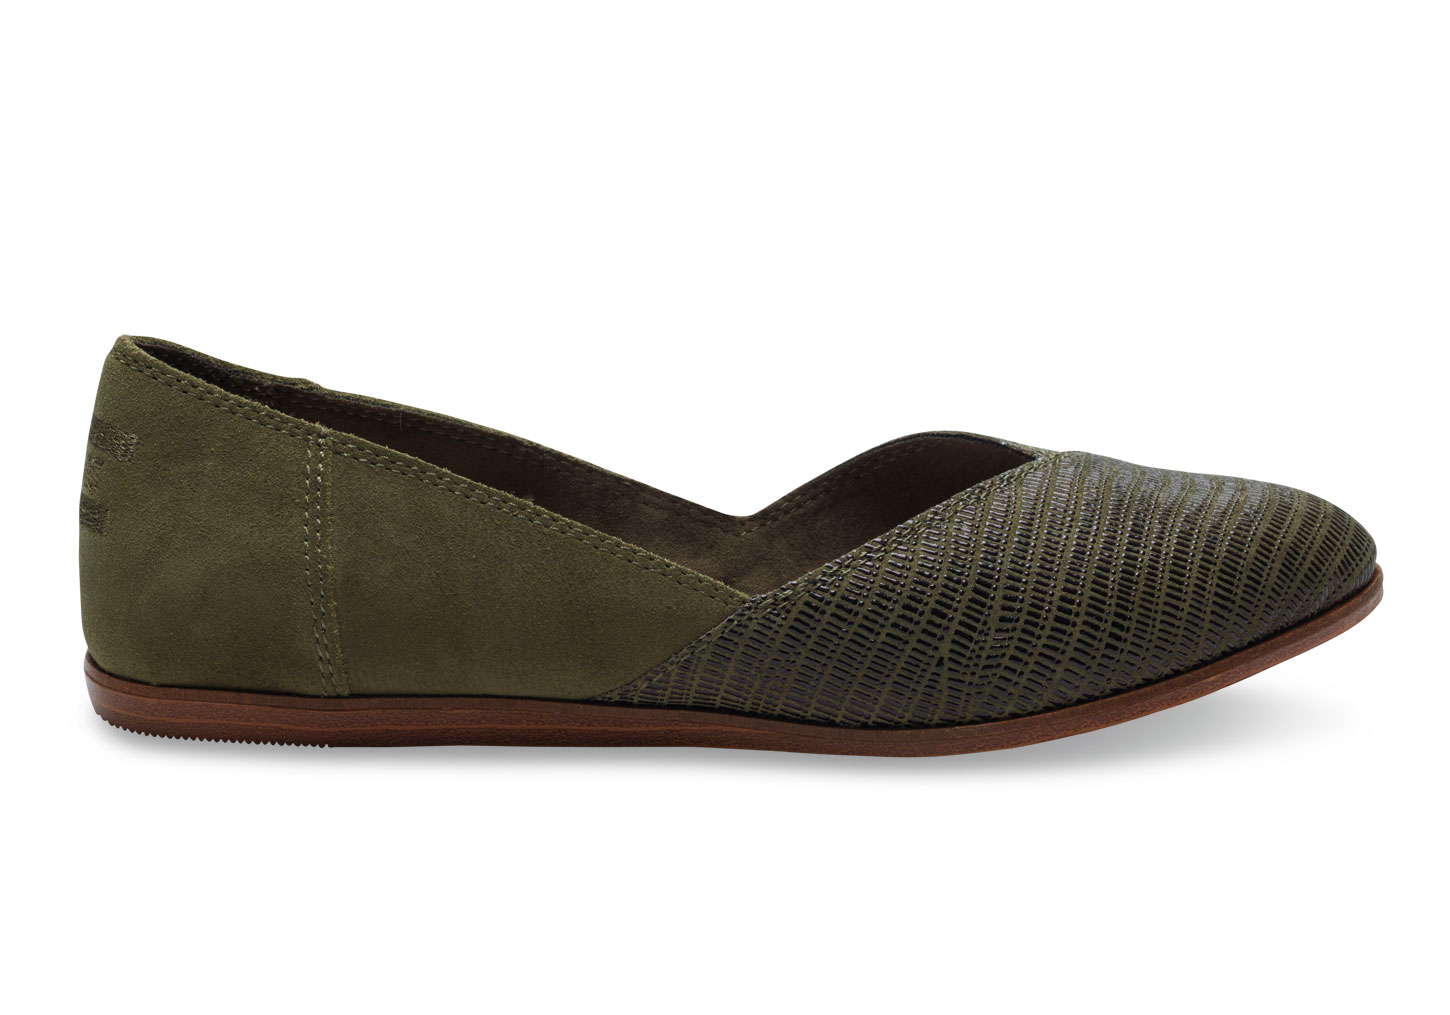 Toms Tarmac Olive Suede Emboss Womens Jutti Flats In Green Lyst